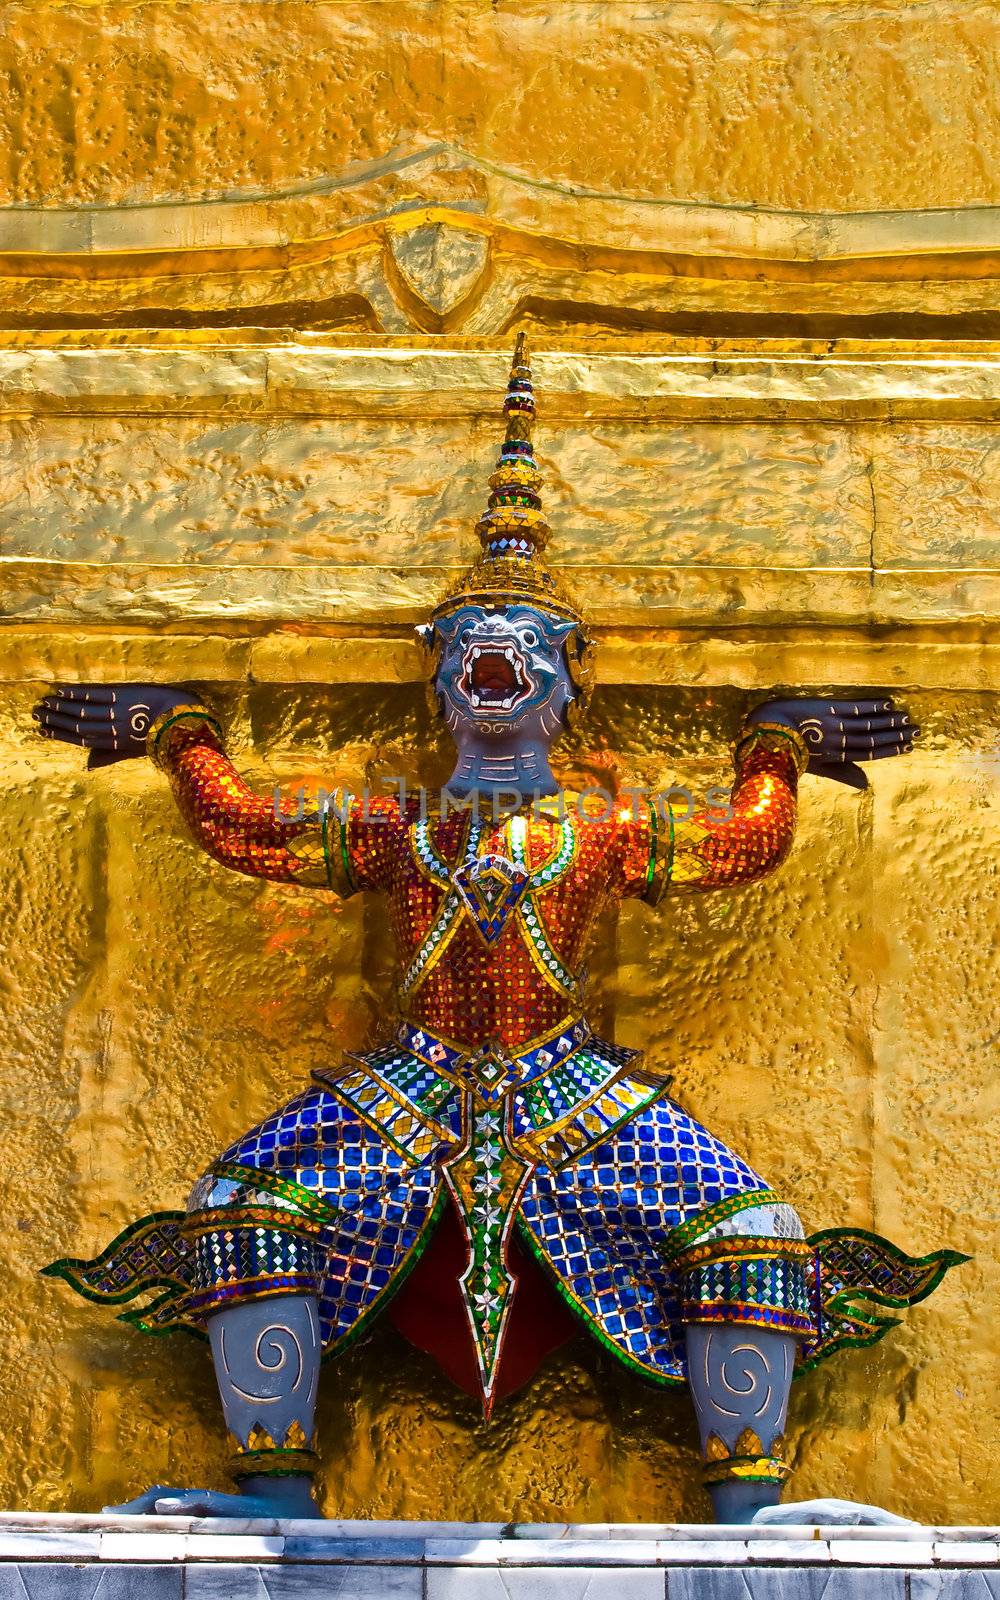 Guardian statue (yak) at the temple Wat phra kaew in the Grand palace area, one of the major tourism attractions in Bangkok, Thailand